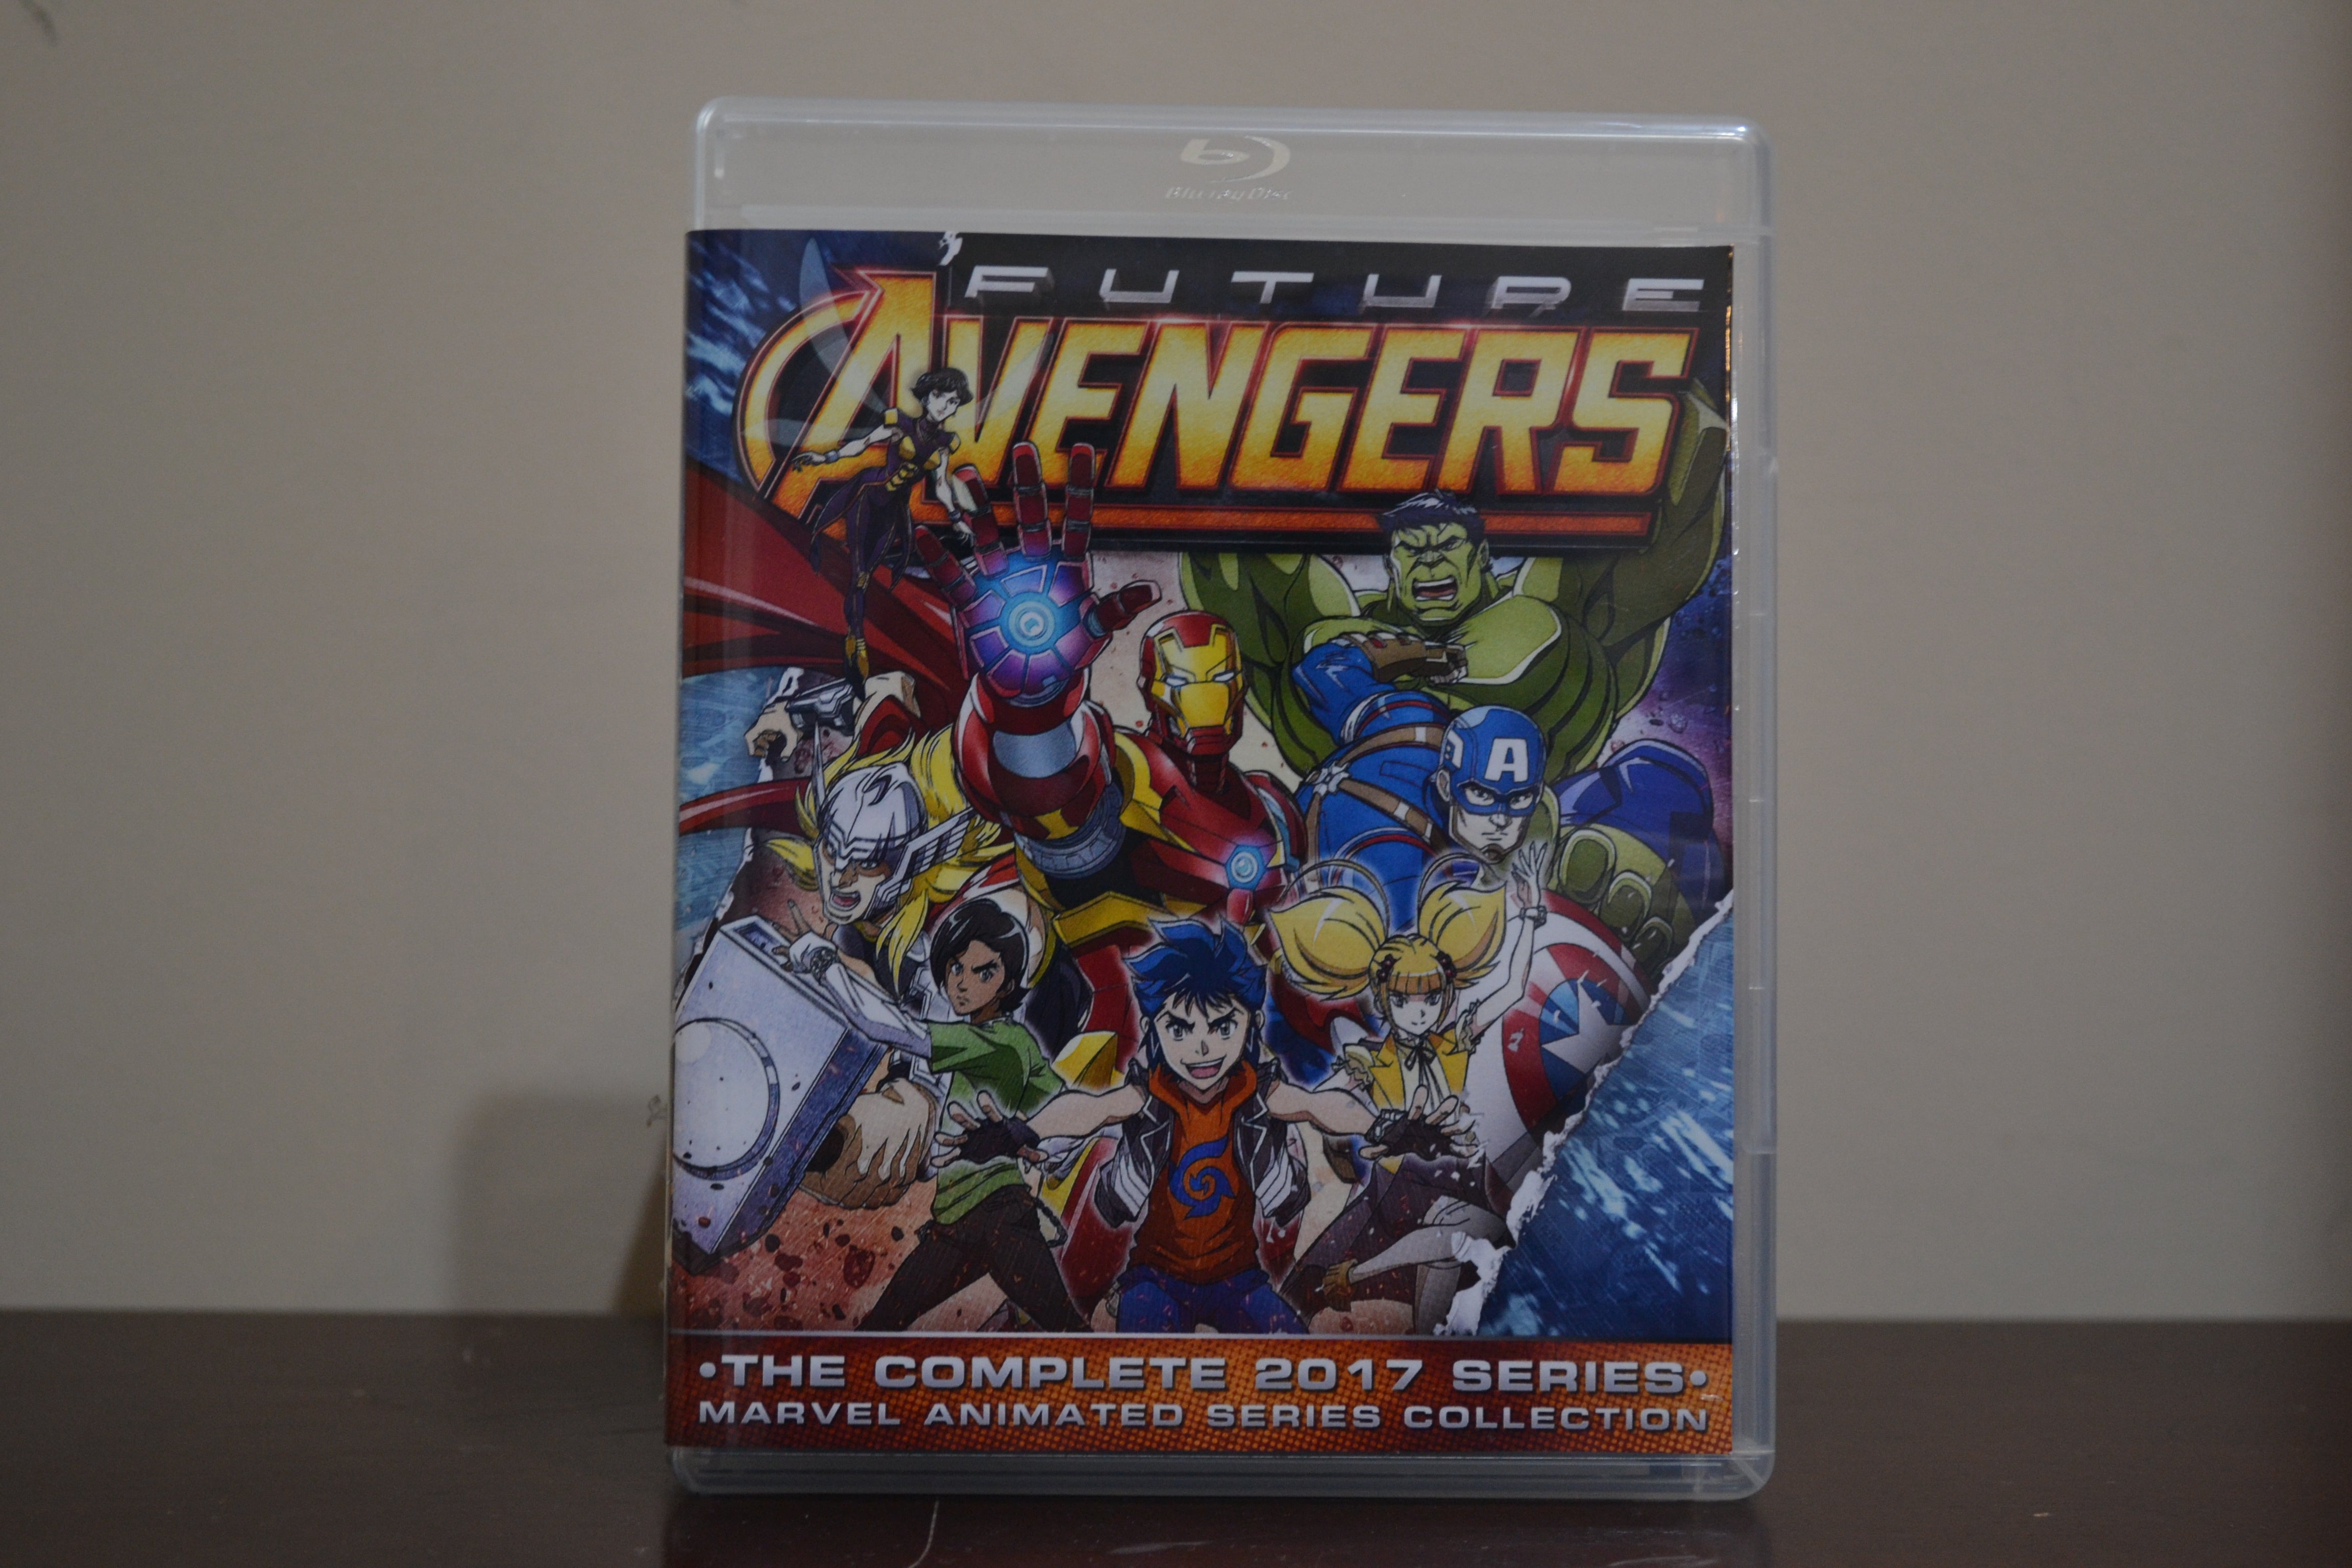 Future Avengers The Complete Series Blu-ray